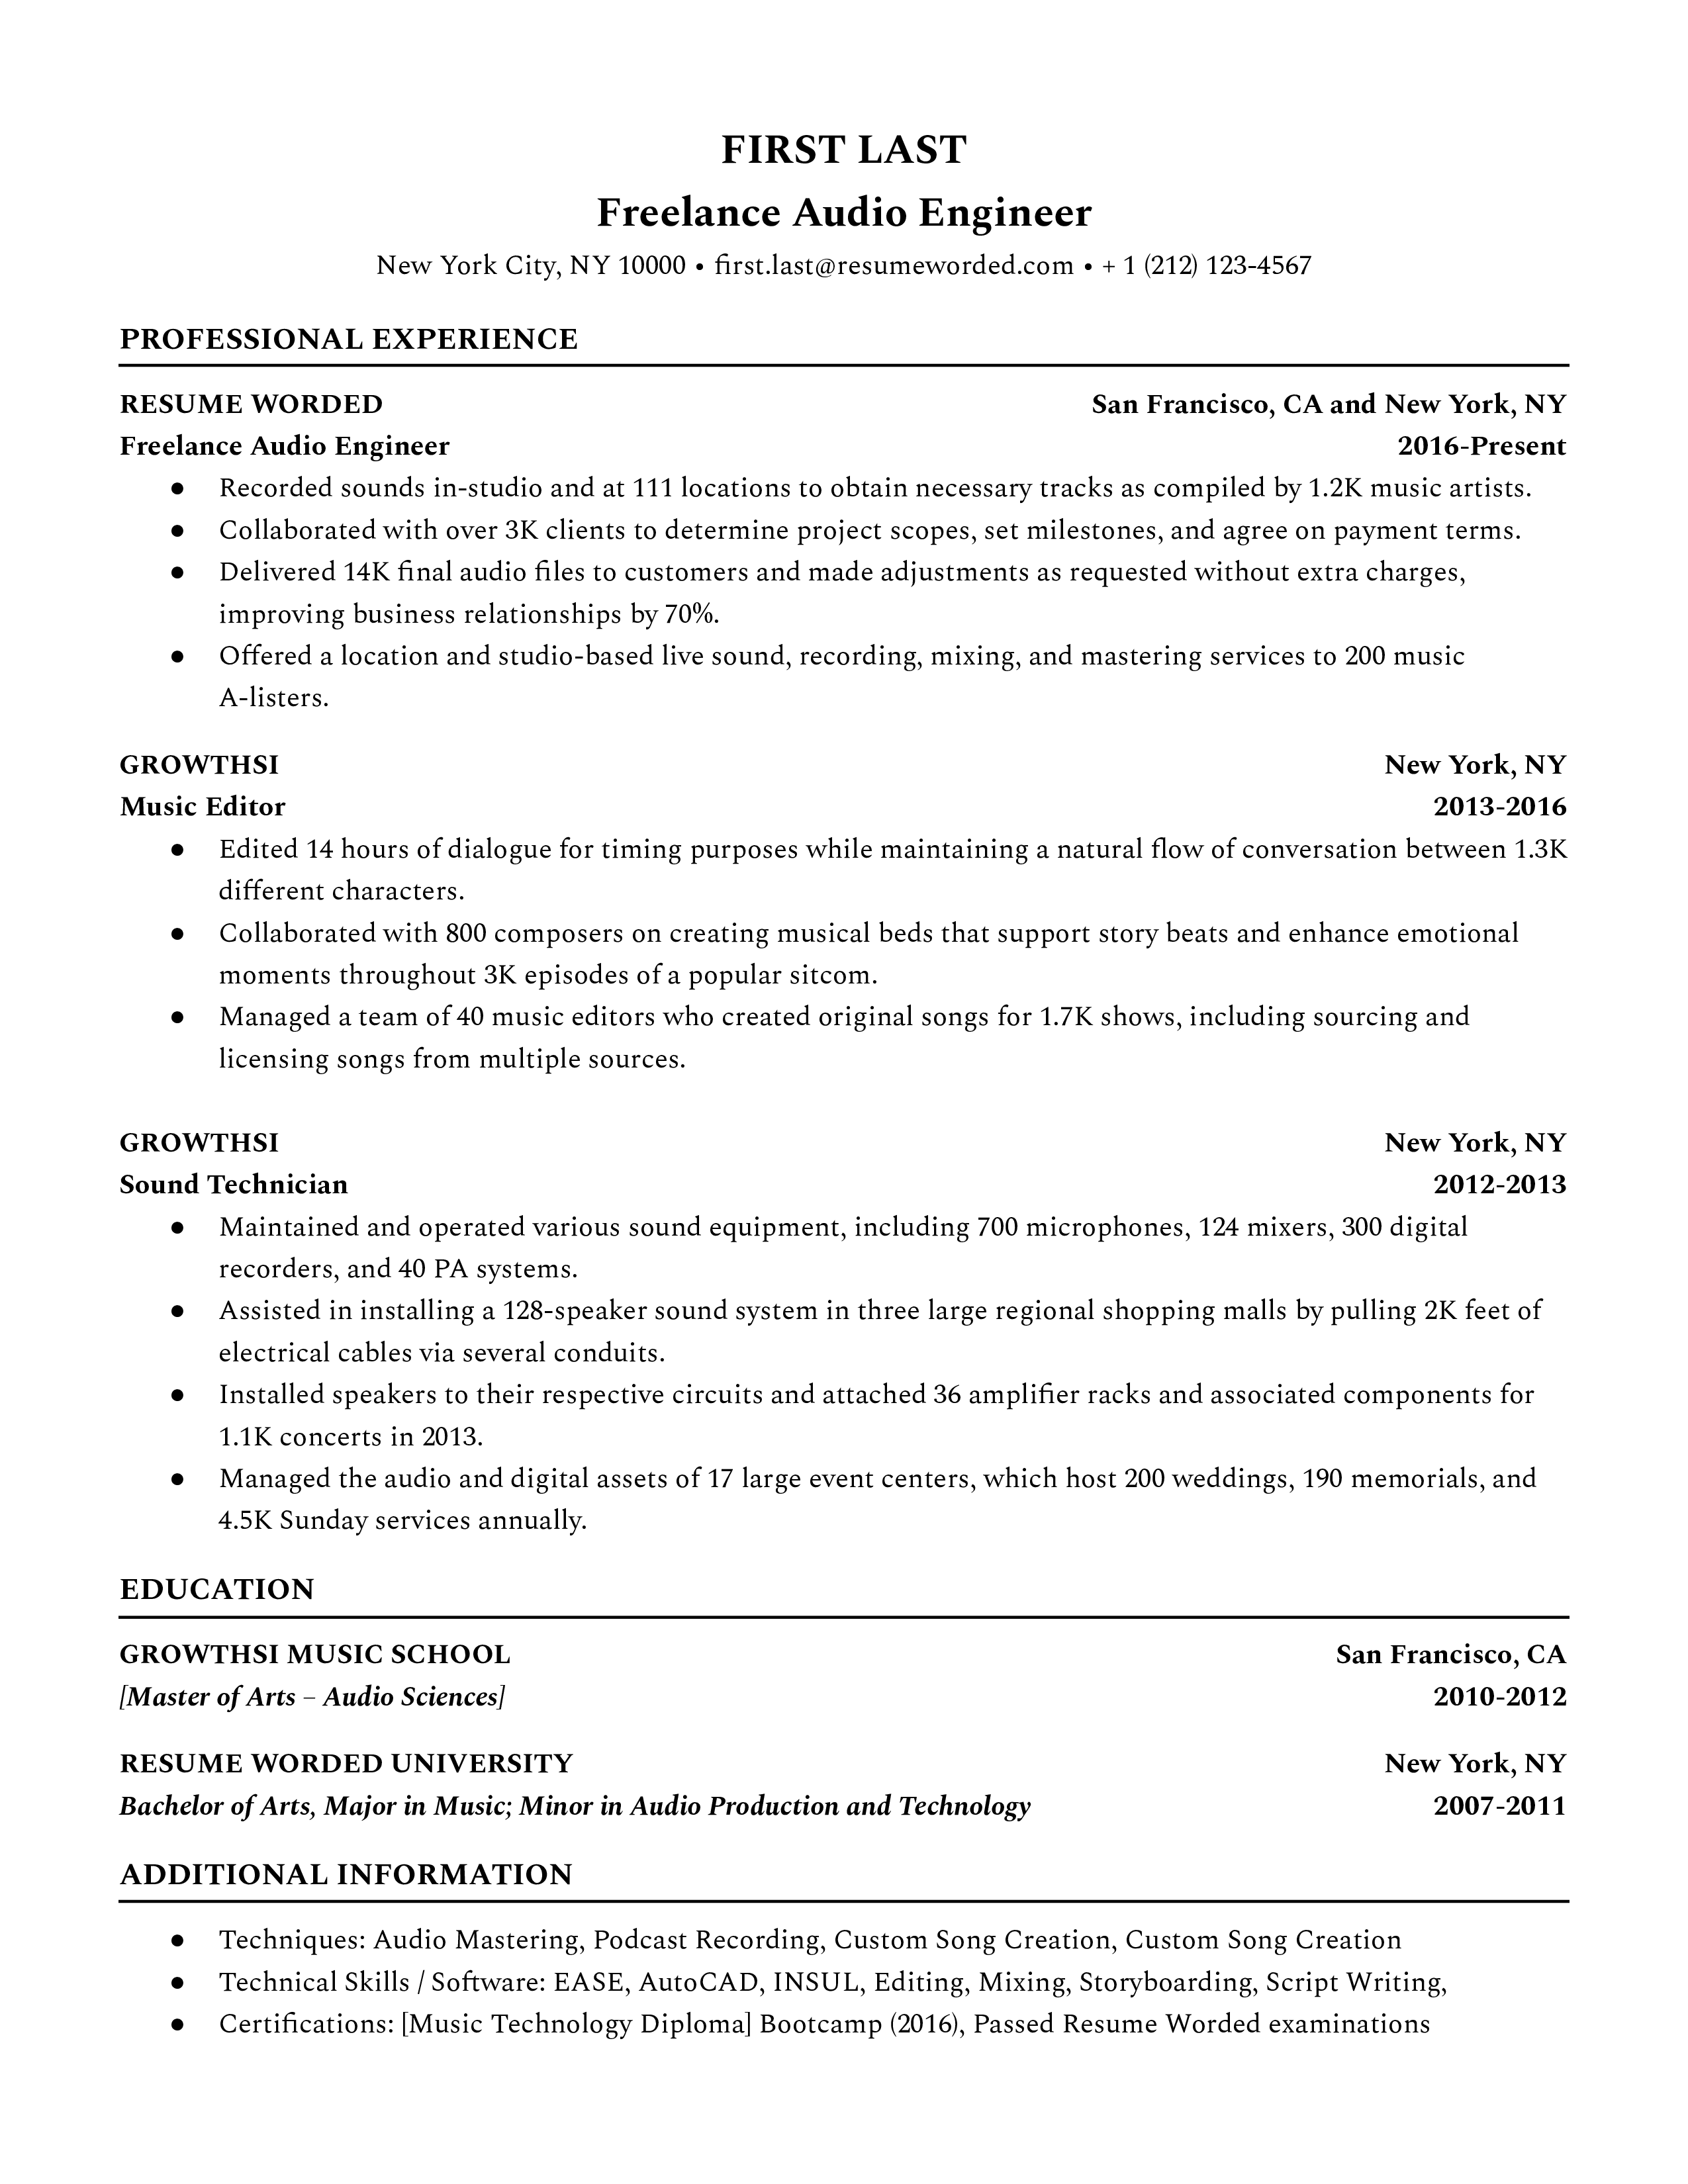 A comprehensive and well-structured CV for a Freelance Audio Engineer position.